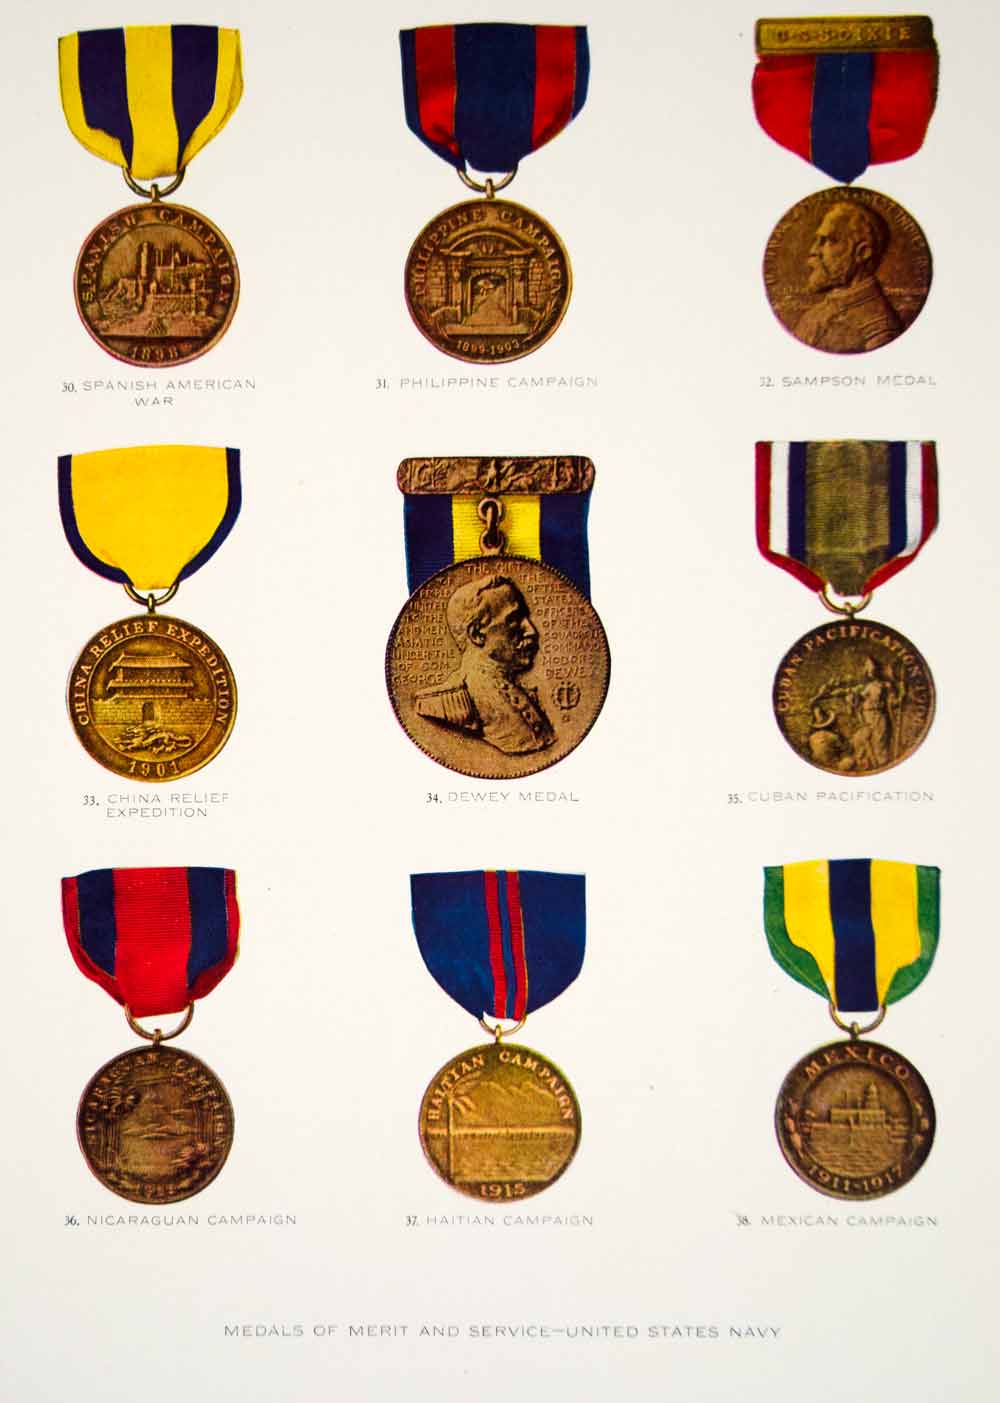 1919 Color Print Medals Merit Service Honor Marines Navy United States YNG4